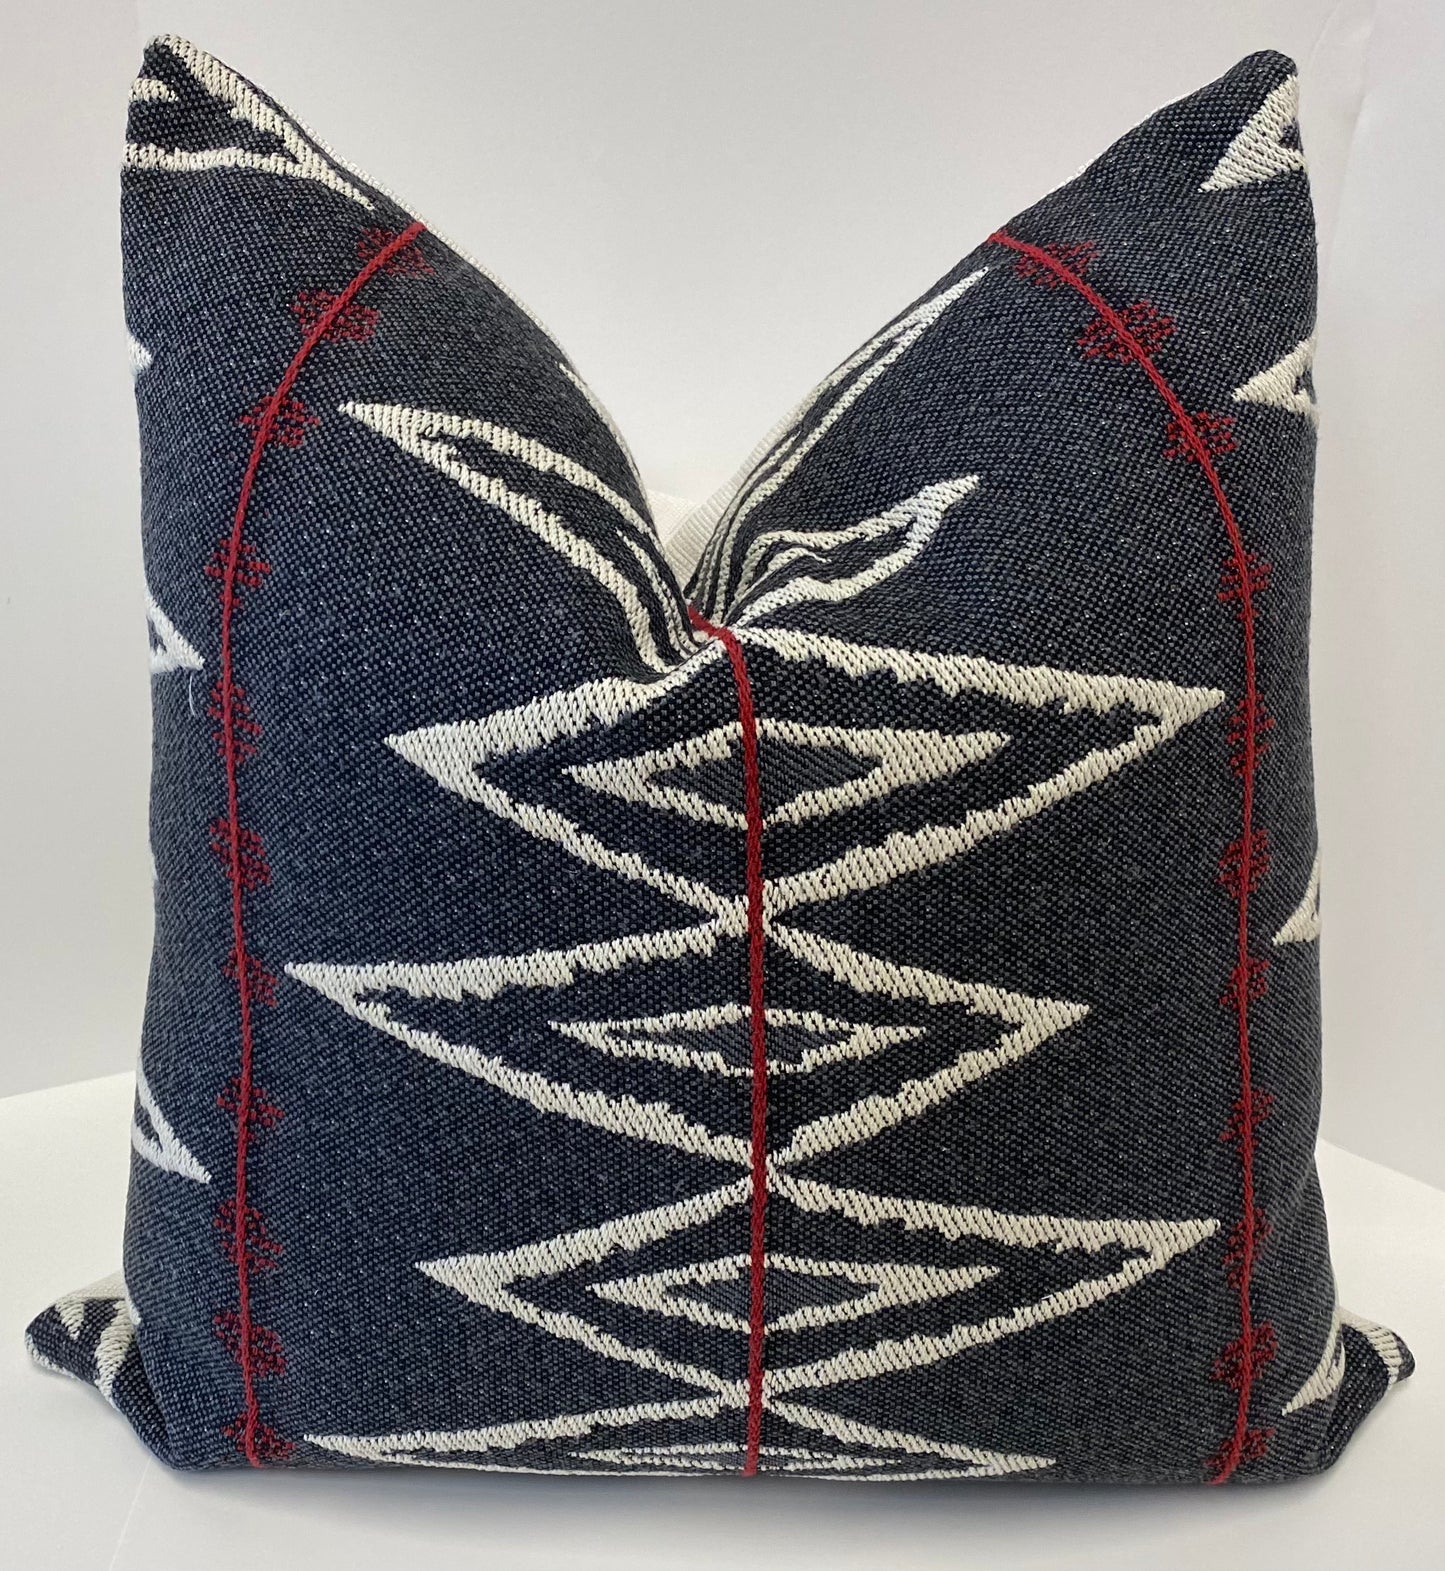 Luxury Pillow - 24" x 24" - Arrow; Deep blue black woven background with a white and red woven design